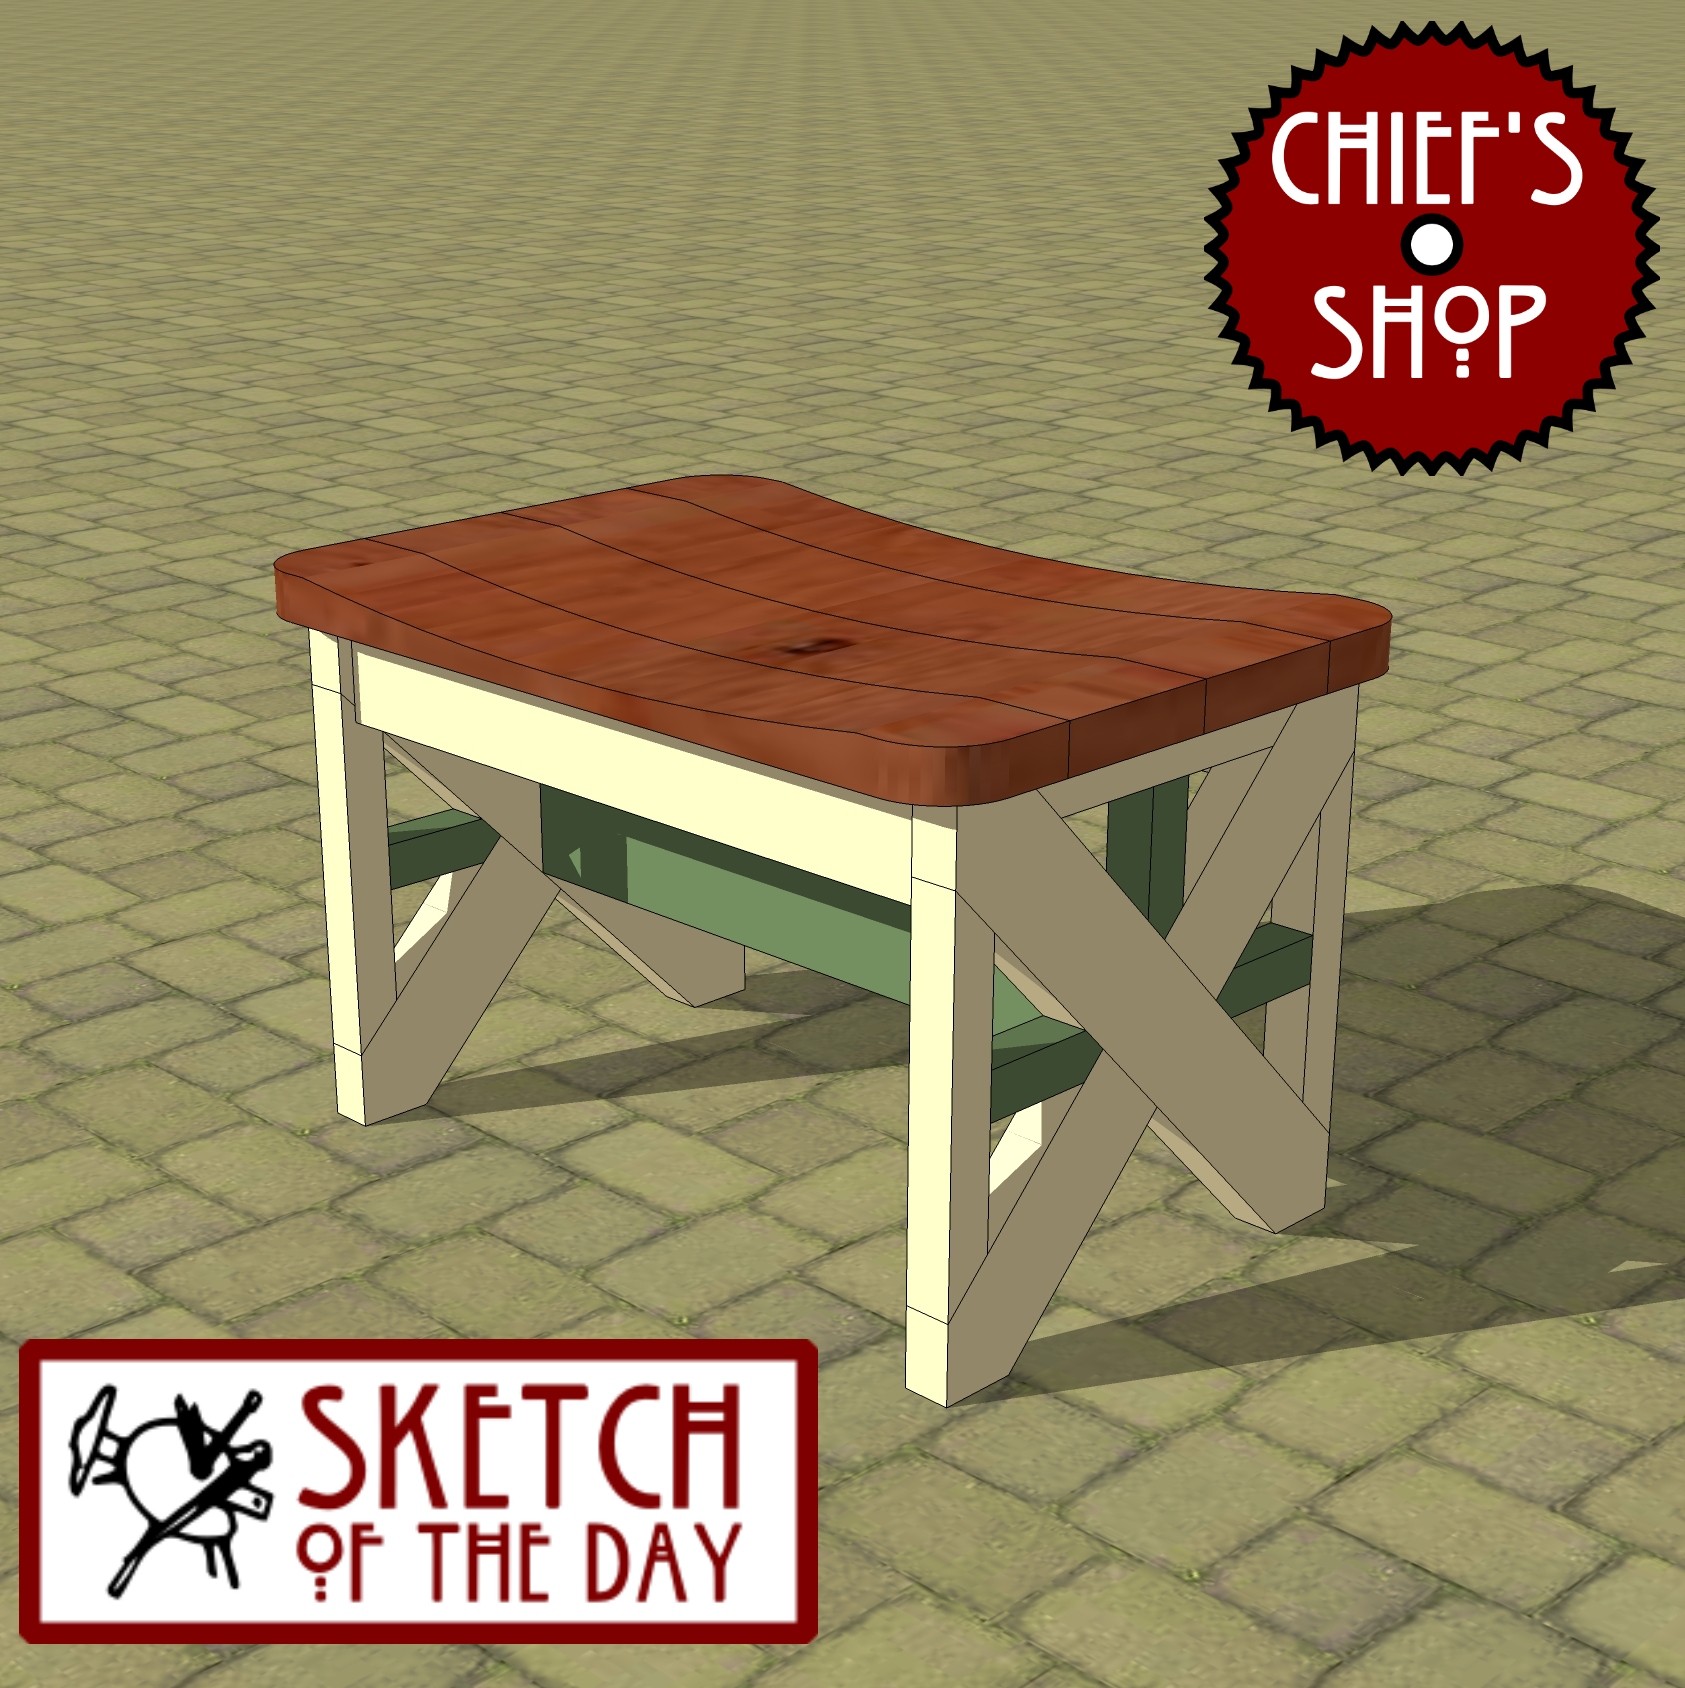 Sketch of the Day: Resort Stool #woodworking #chiefsshop